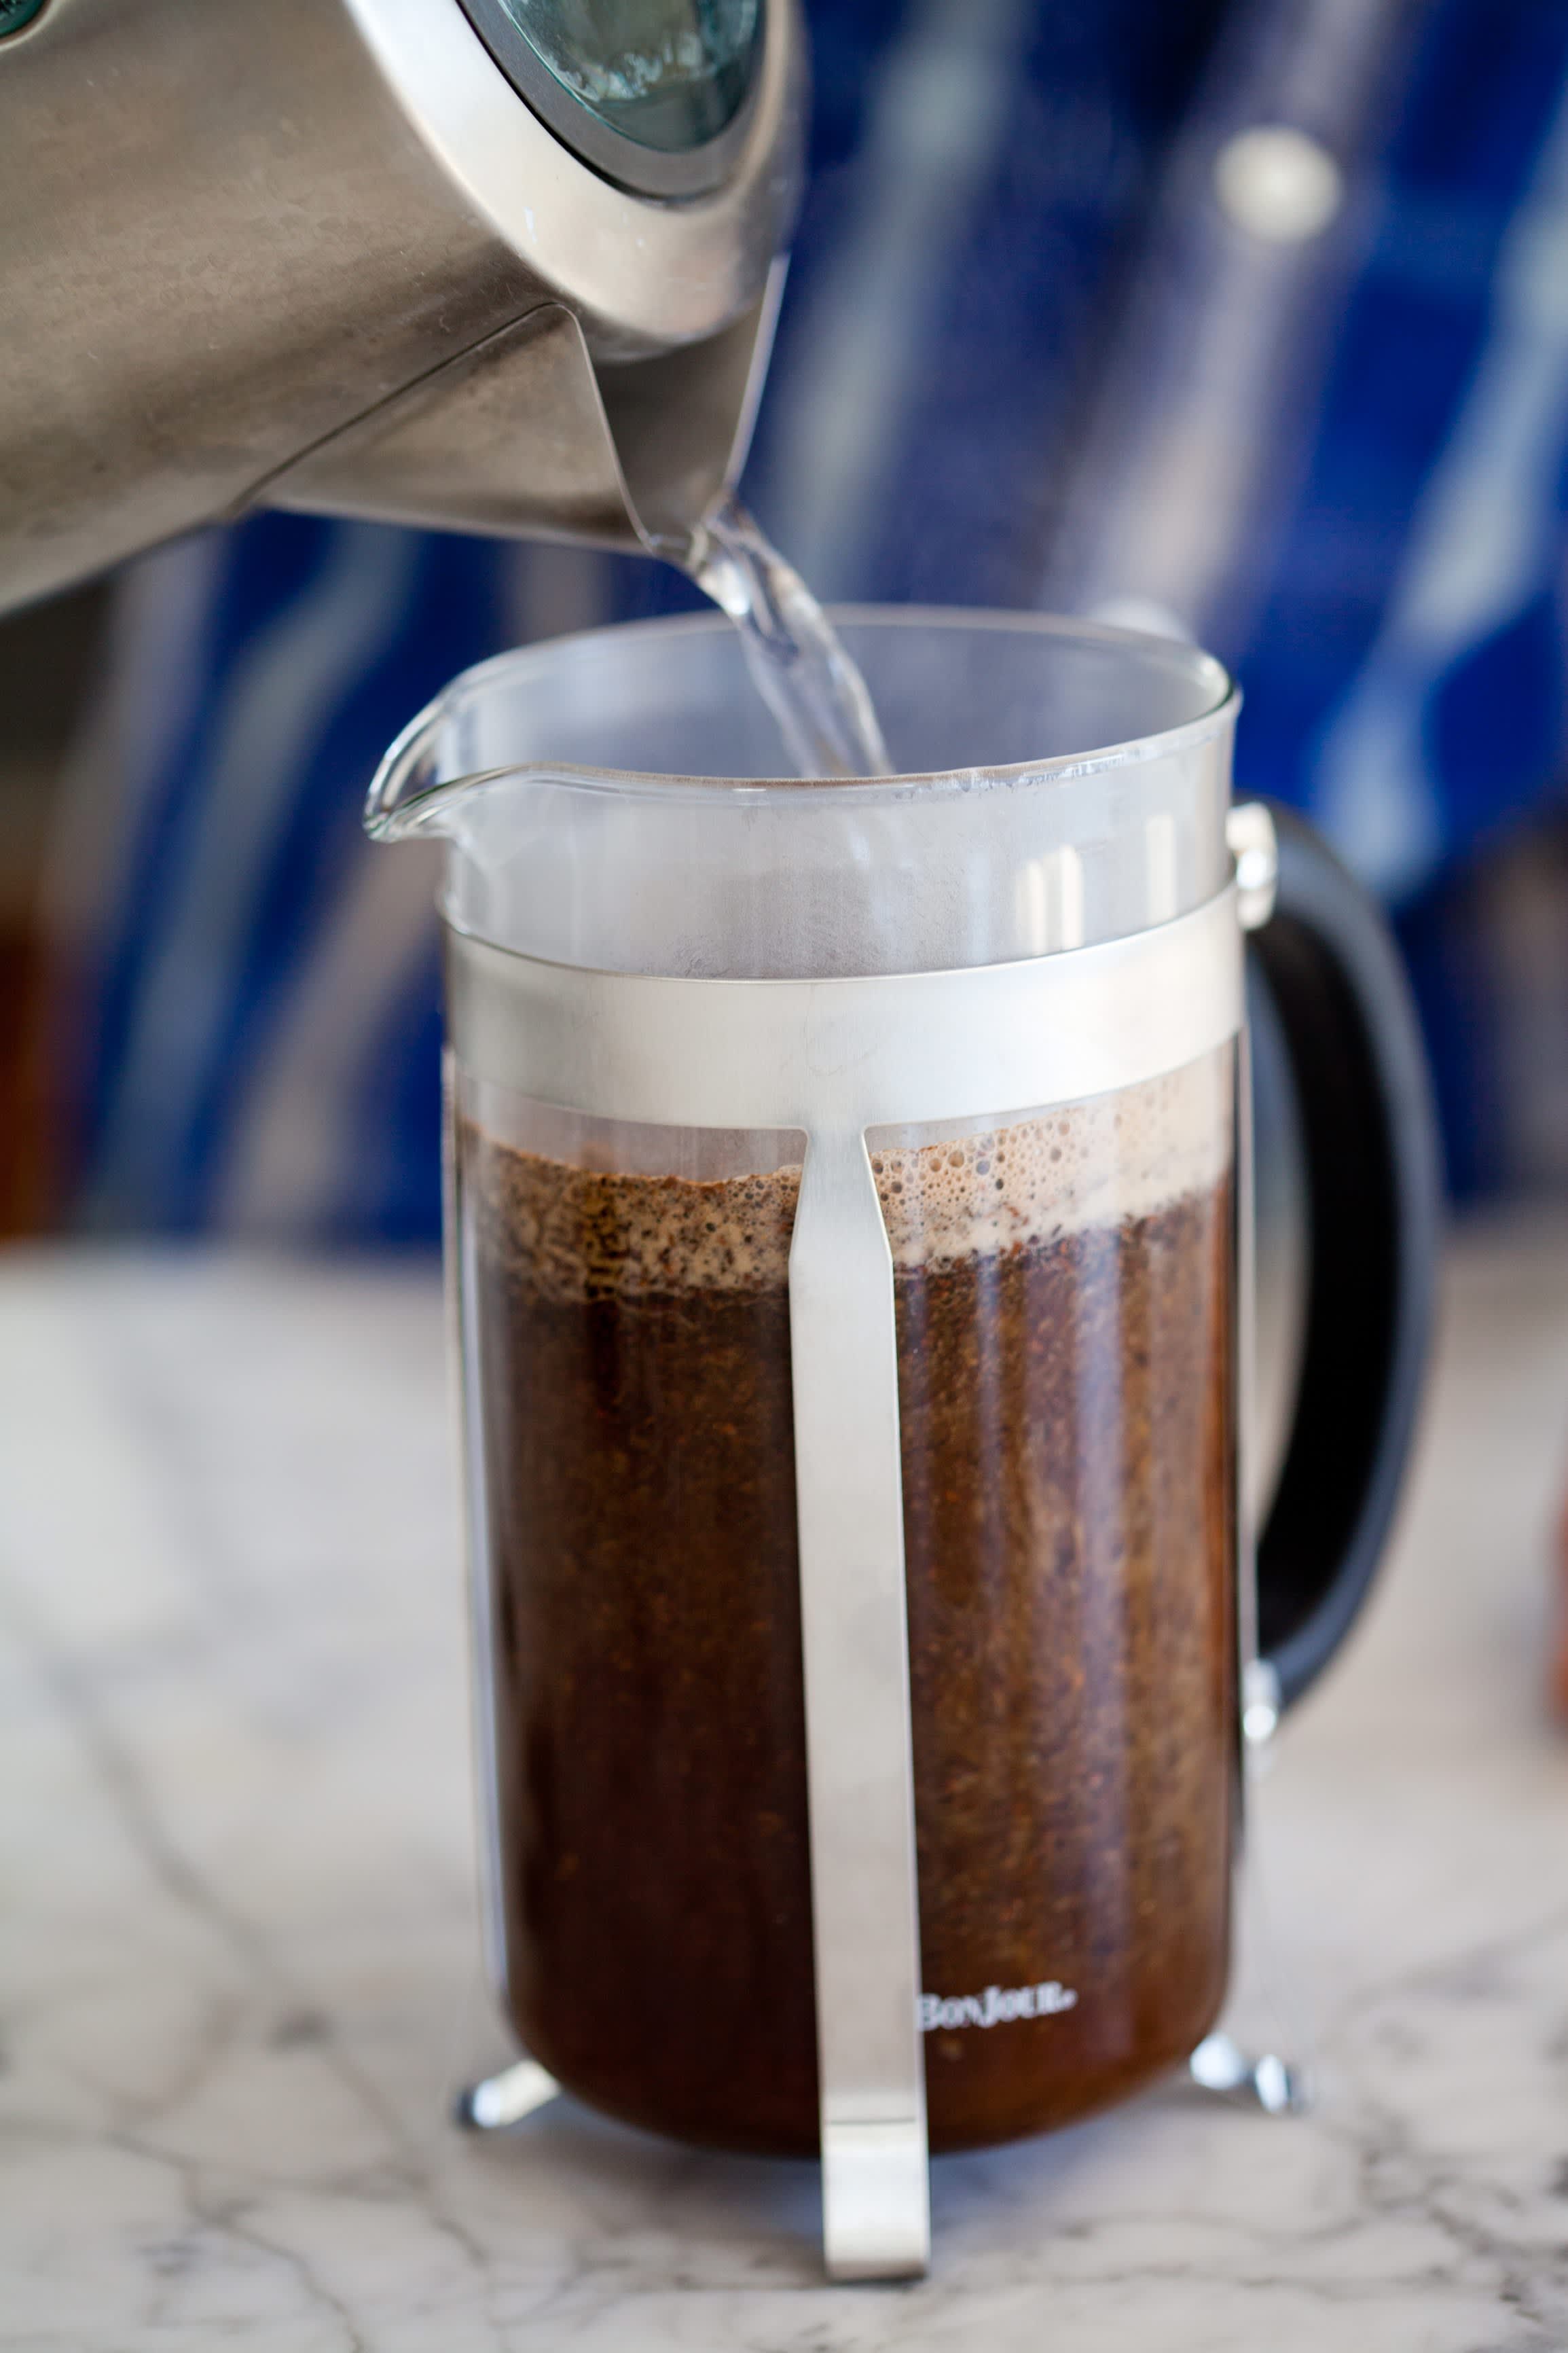 How To Make French Press Coffee | Kitchn